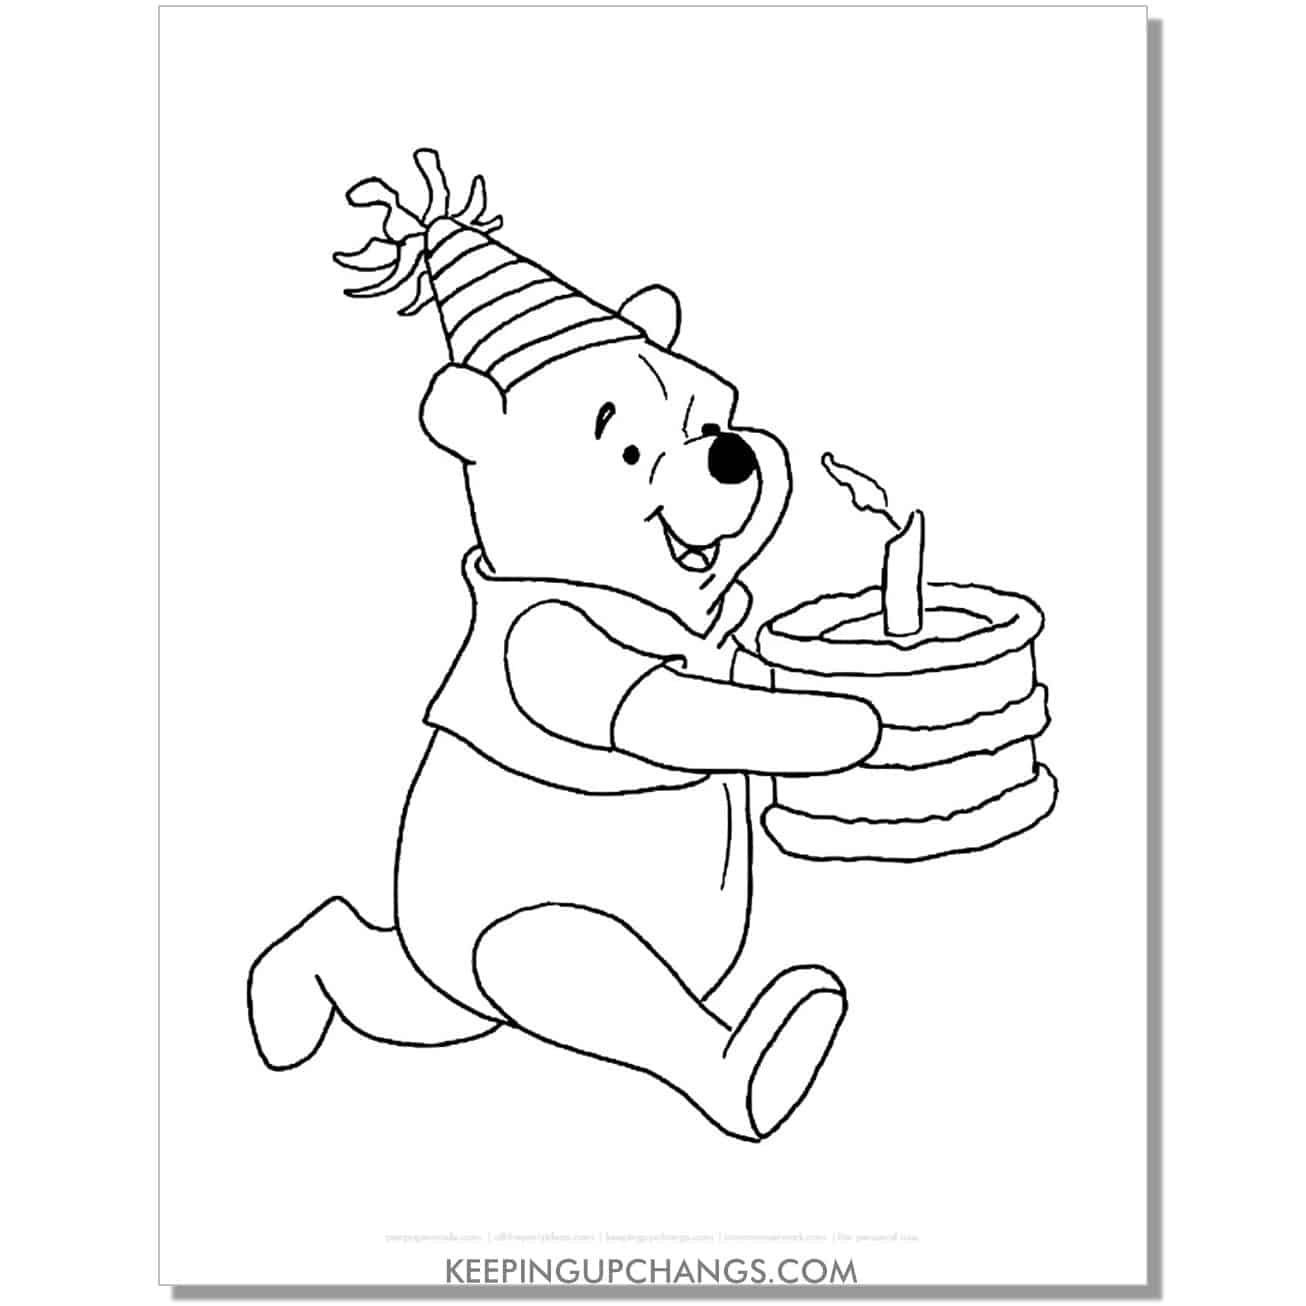 winnie the pooh with happy birthday cake coloring page, sheet.